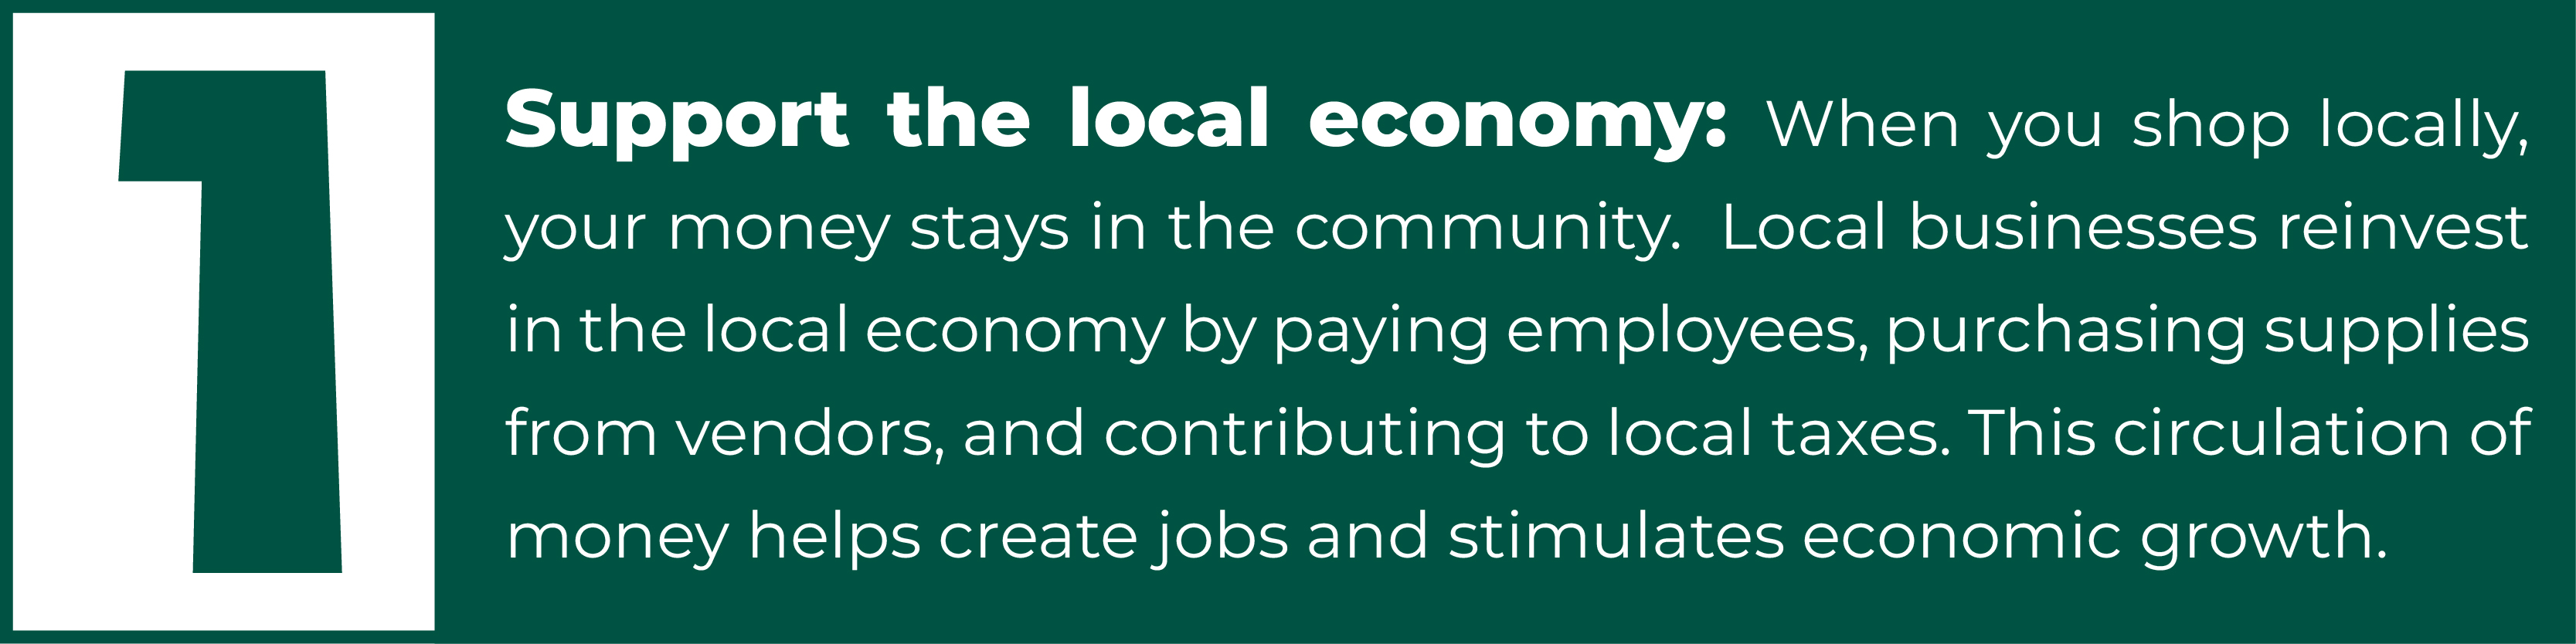 1. Support the local economy: When you shop locally, your money stays in the community.  Local businesses reinvest in the local economy by paying employees, purchasing supplies from vendors, and contributing to local taxes. This circulation of money helps create jobs and stimulates economic growth.